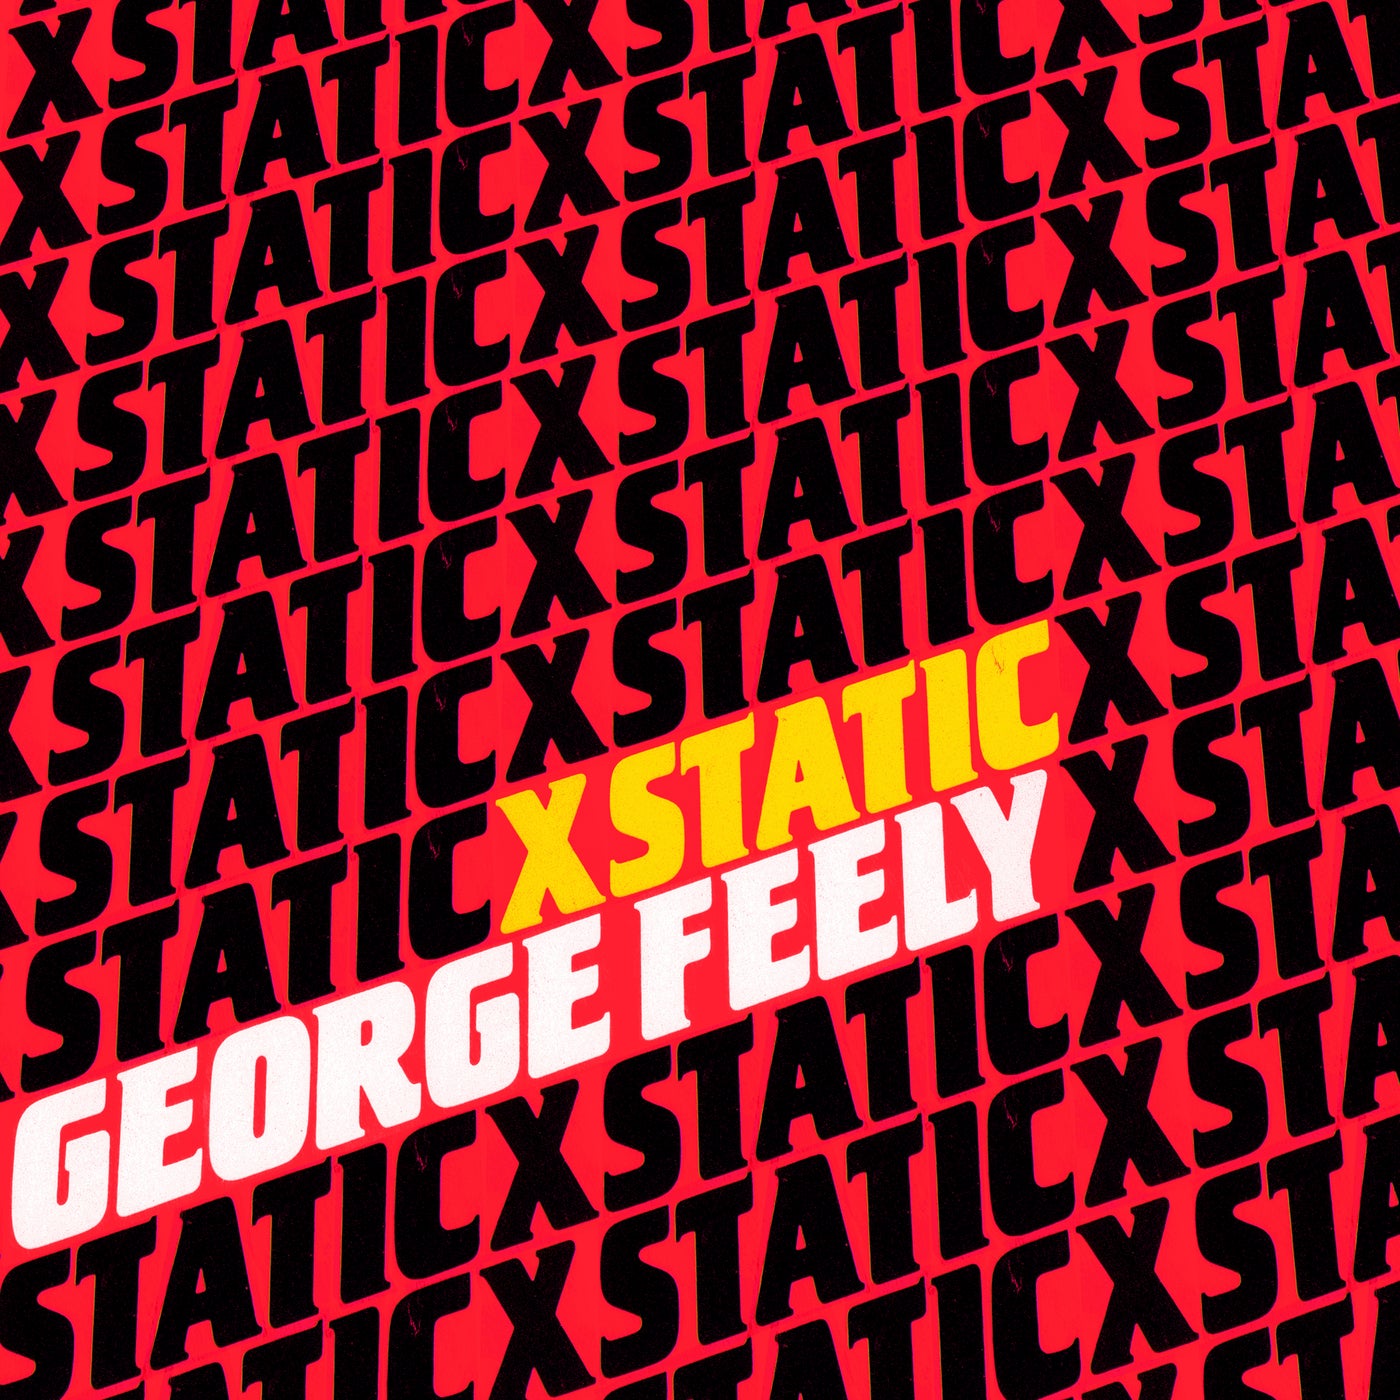 image cover: George Feely - XSTATIC / HOTHAUS066